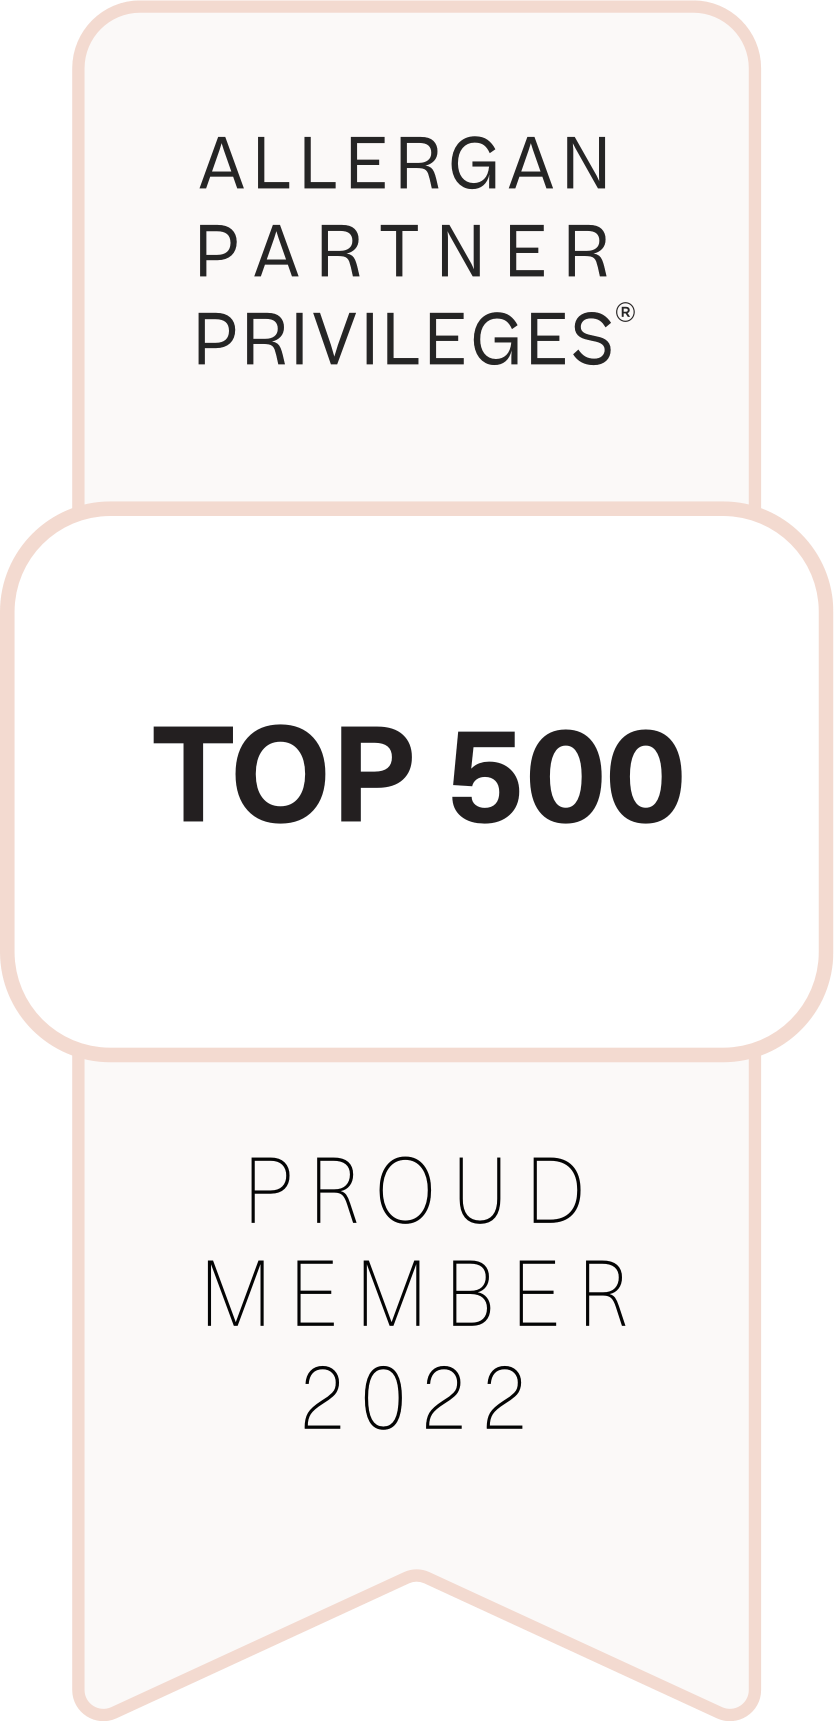 Top 500 Allergan Provider of Fillers and Botox